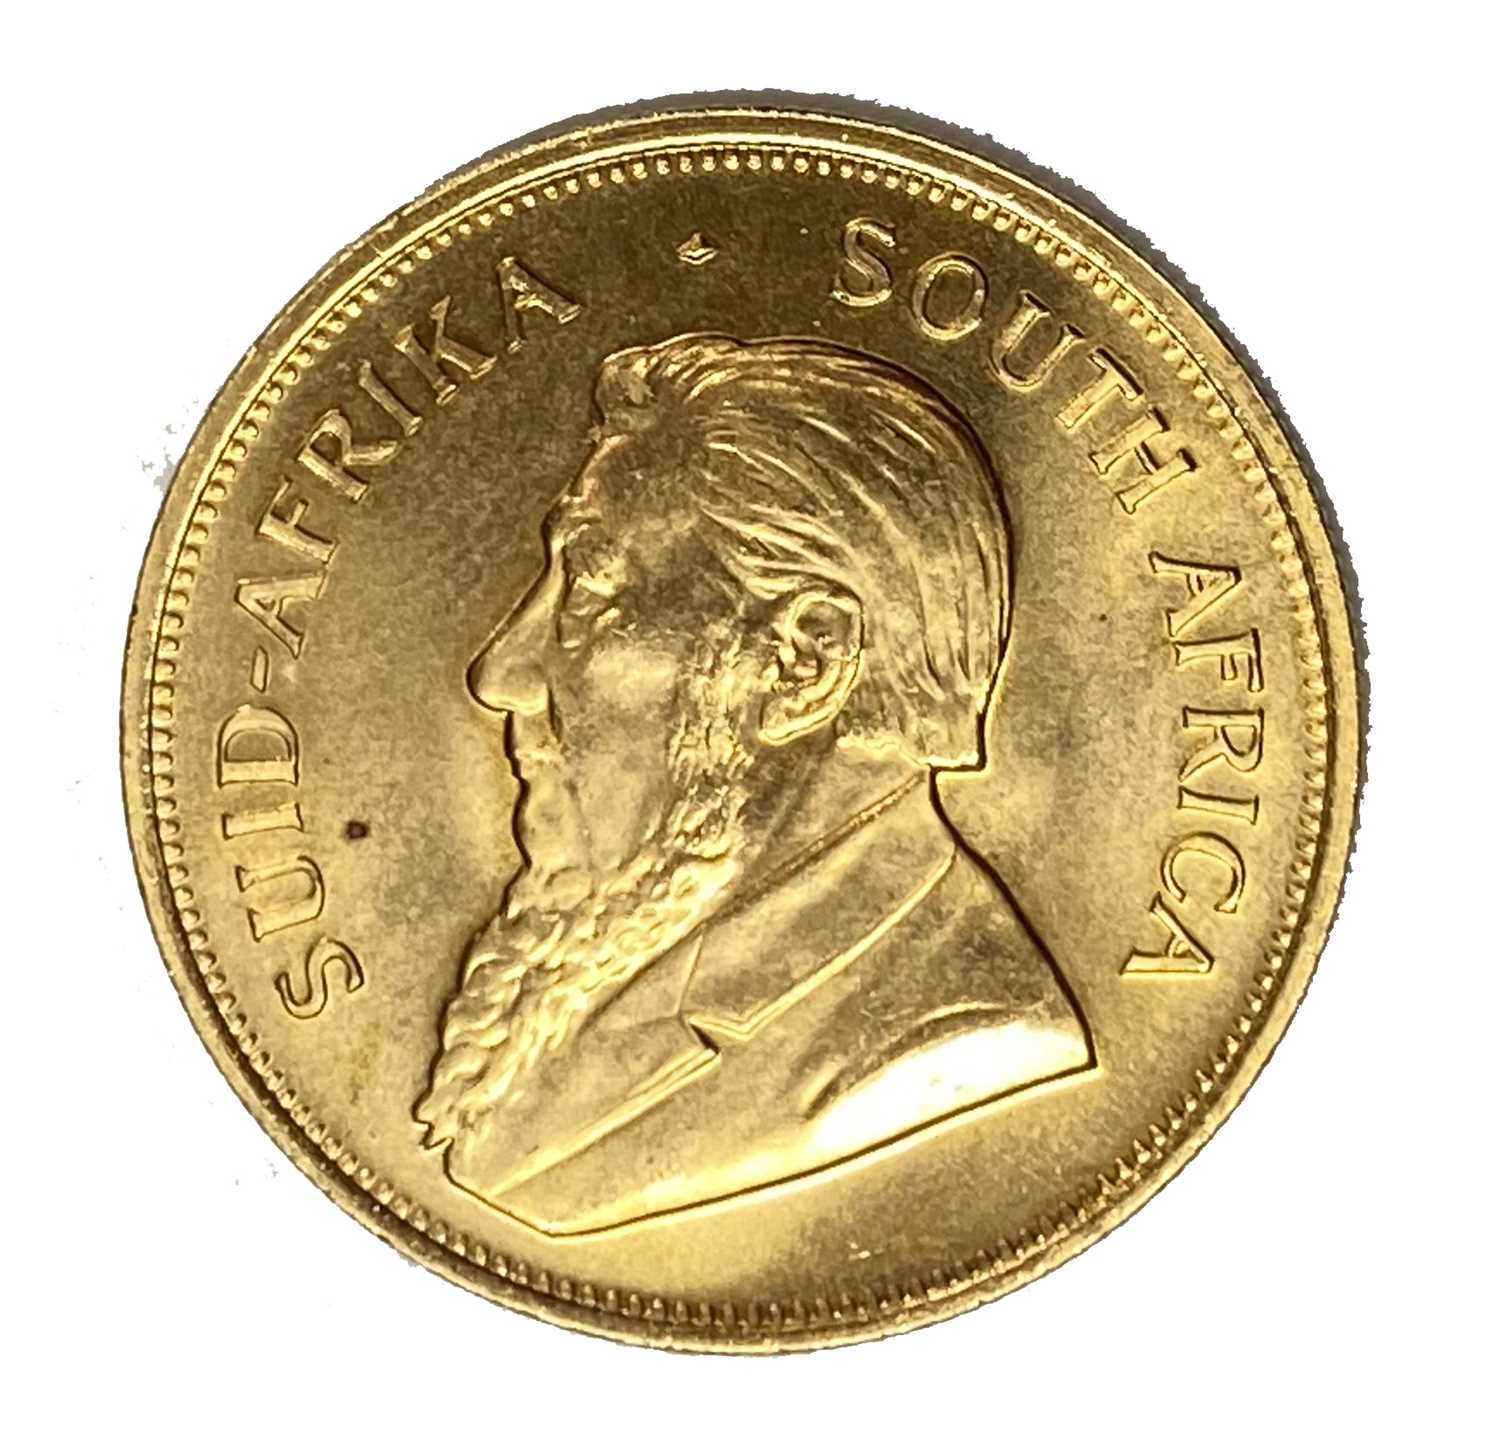 Lot 111 - South Africa, gold Krugerrand coin, 1980